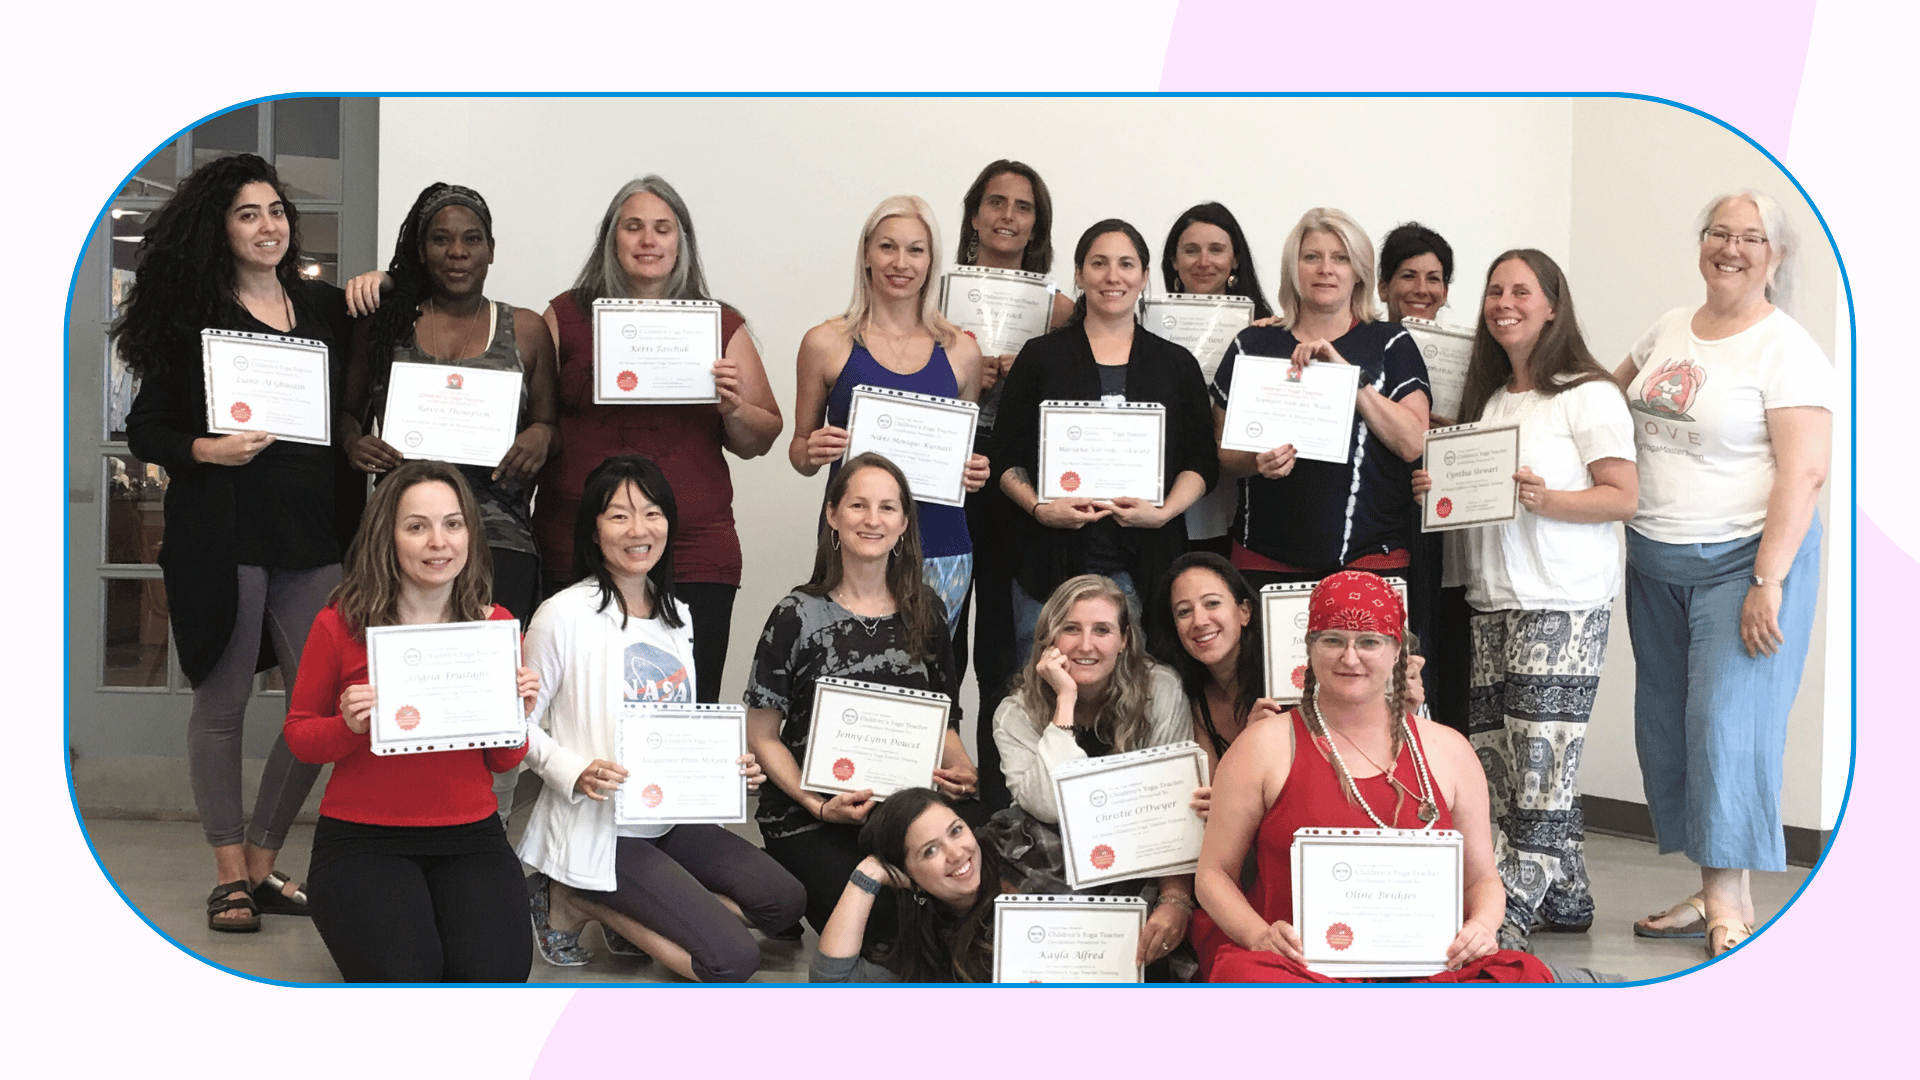 A group of 17 people proudly hold their certificates from the kids yoga teacher training.